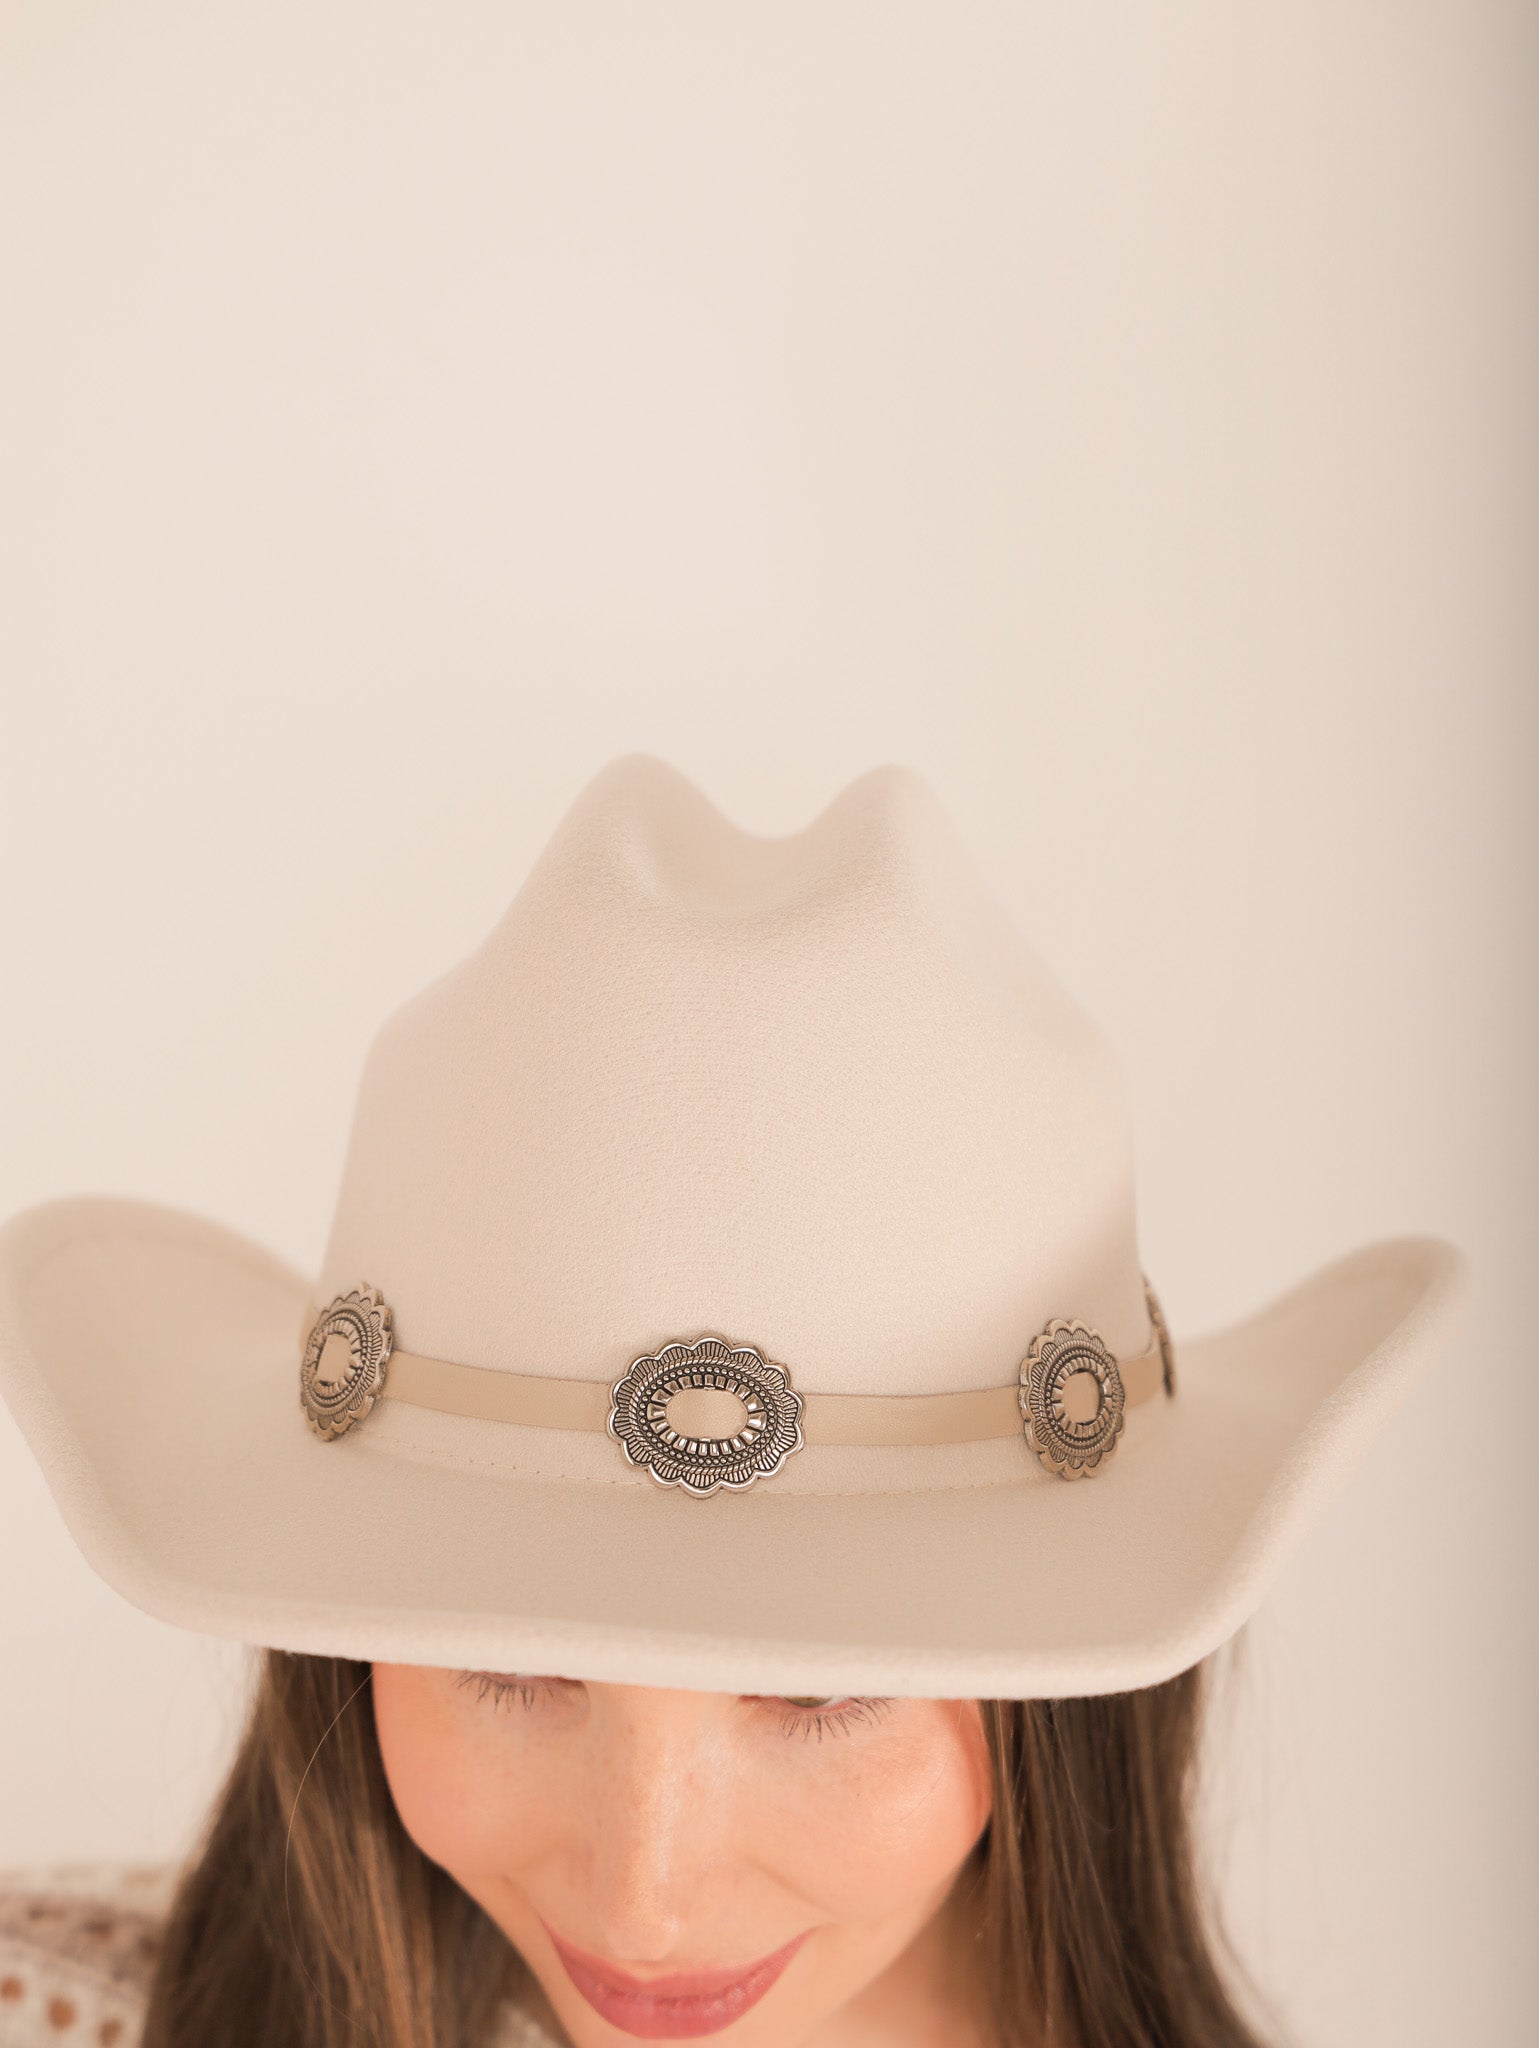 Molly Green - Emmylou Hat - Accessories